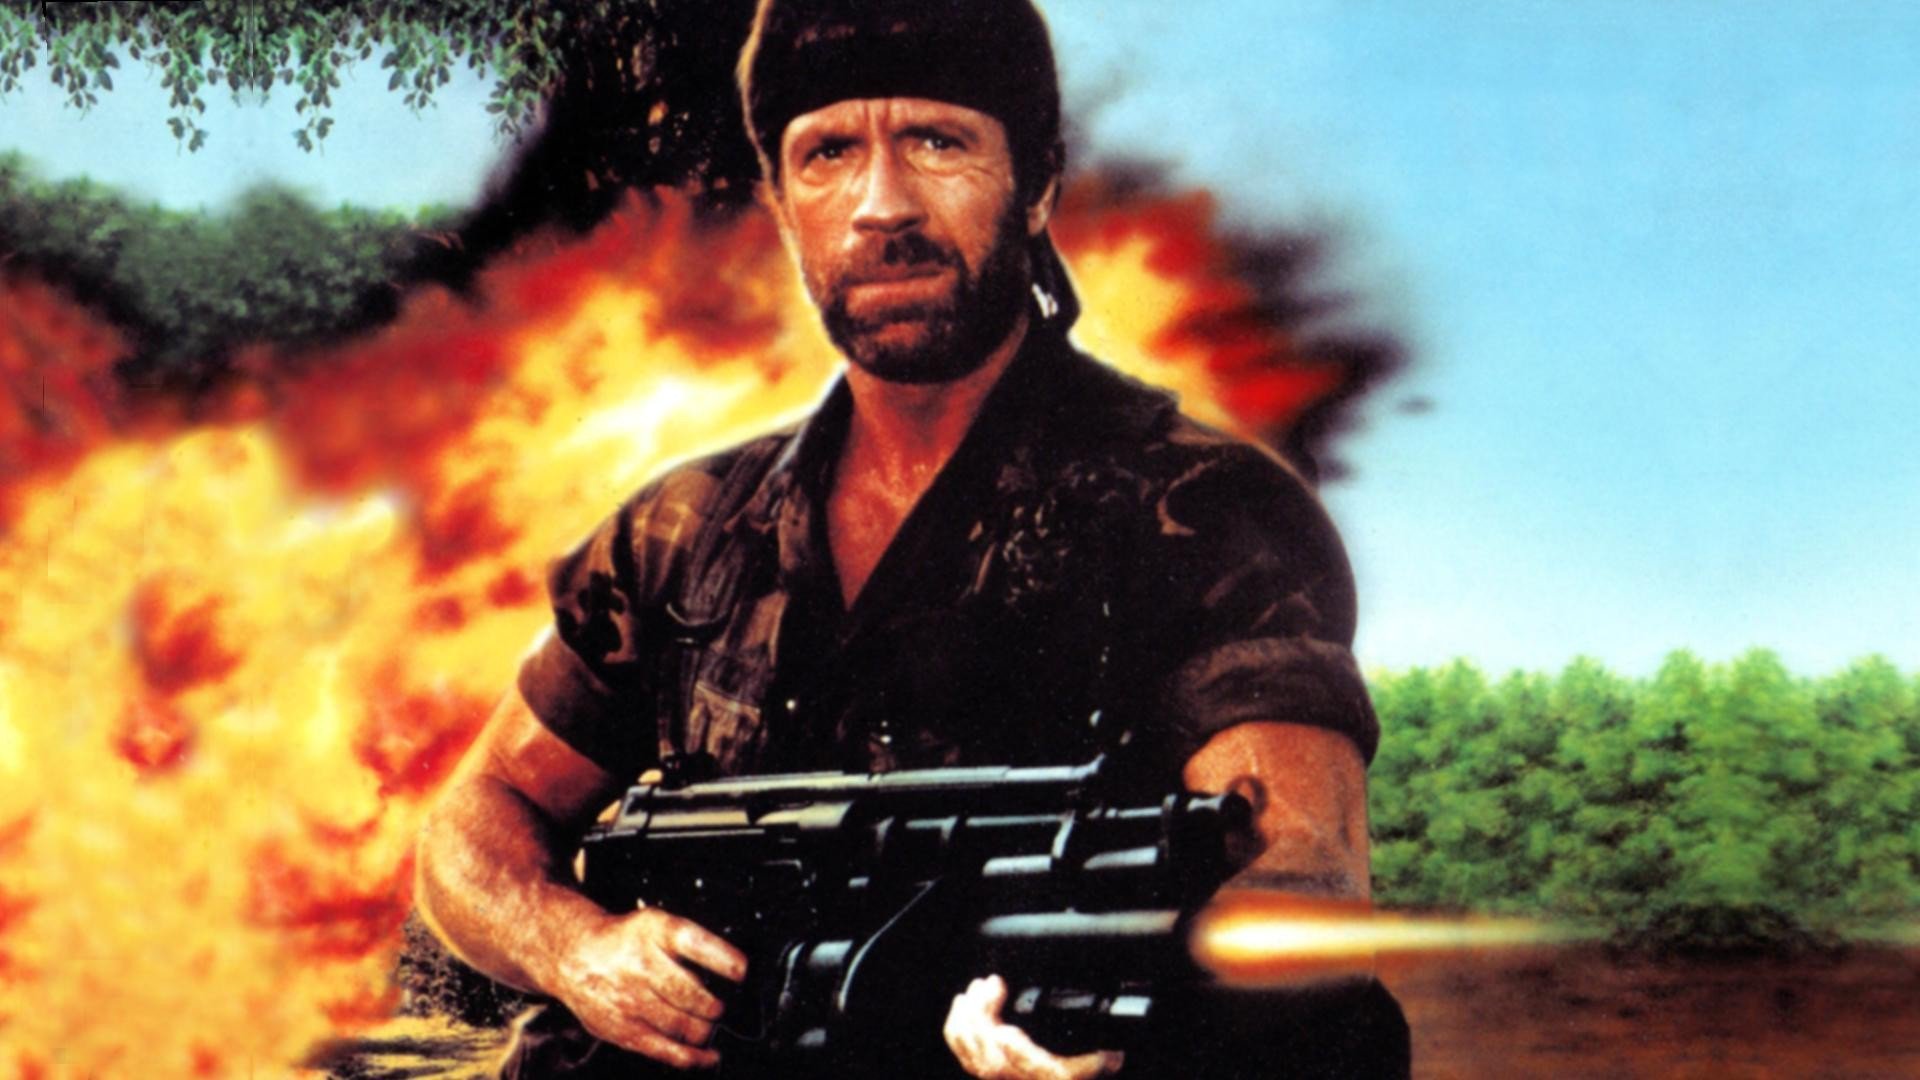 Happy Birthday to the legend that is Chuck Norris! 